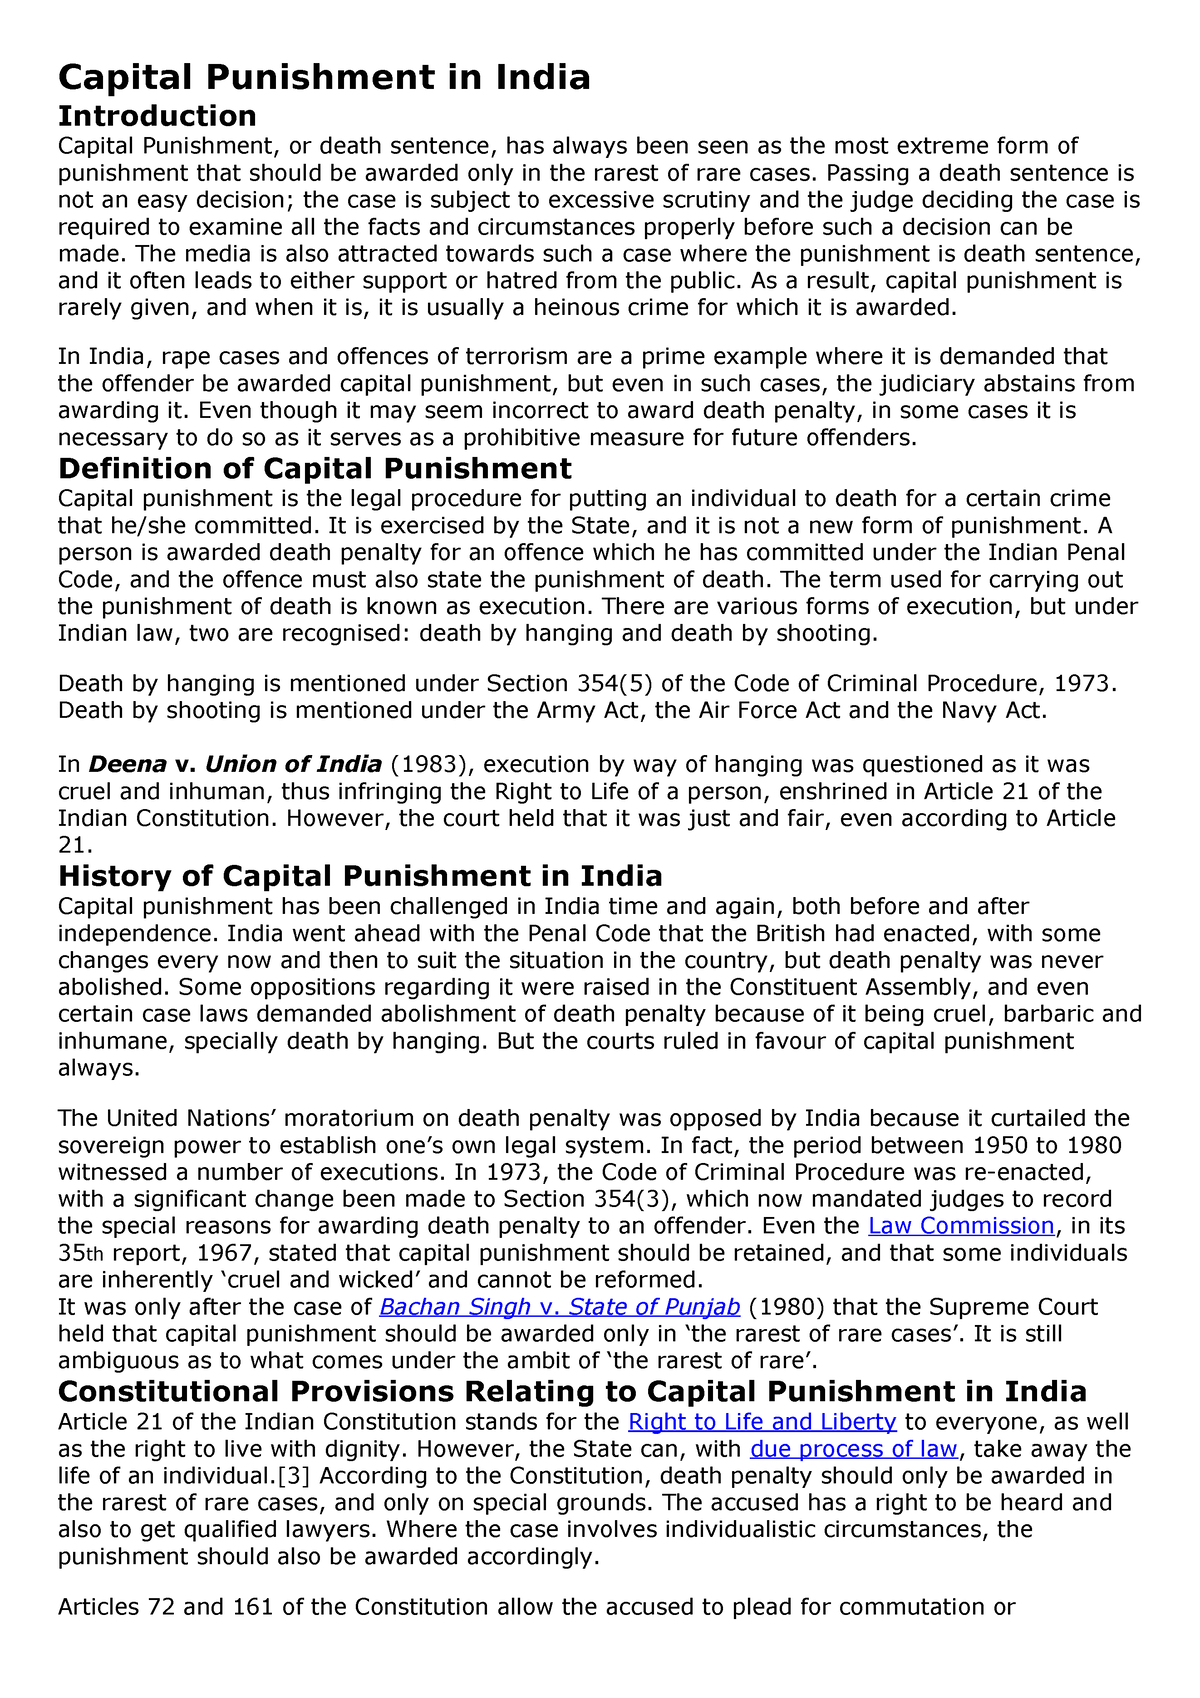 capital punishment in india research paper